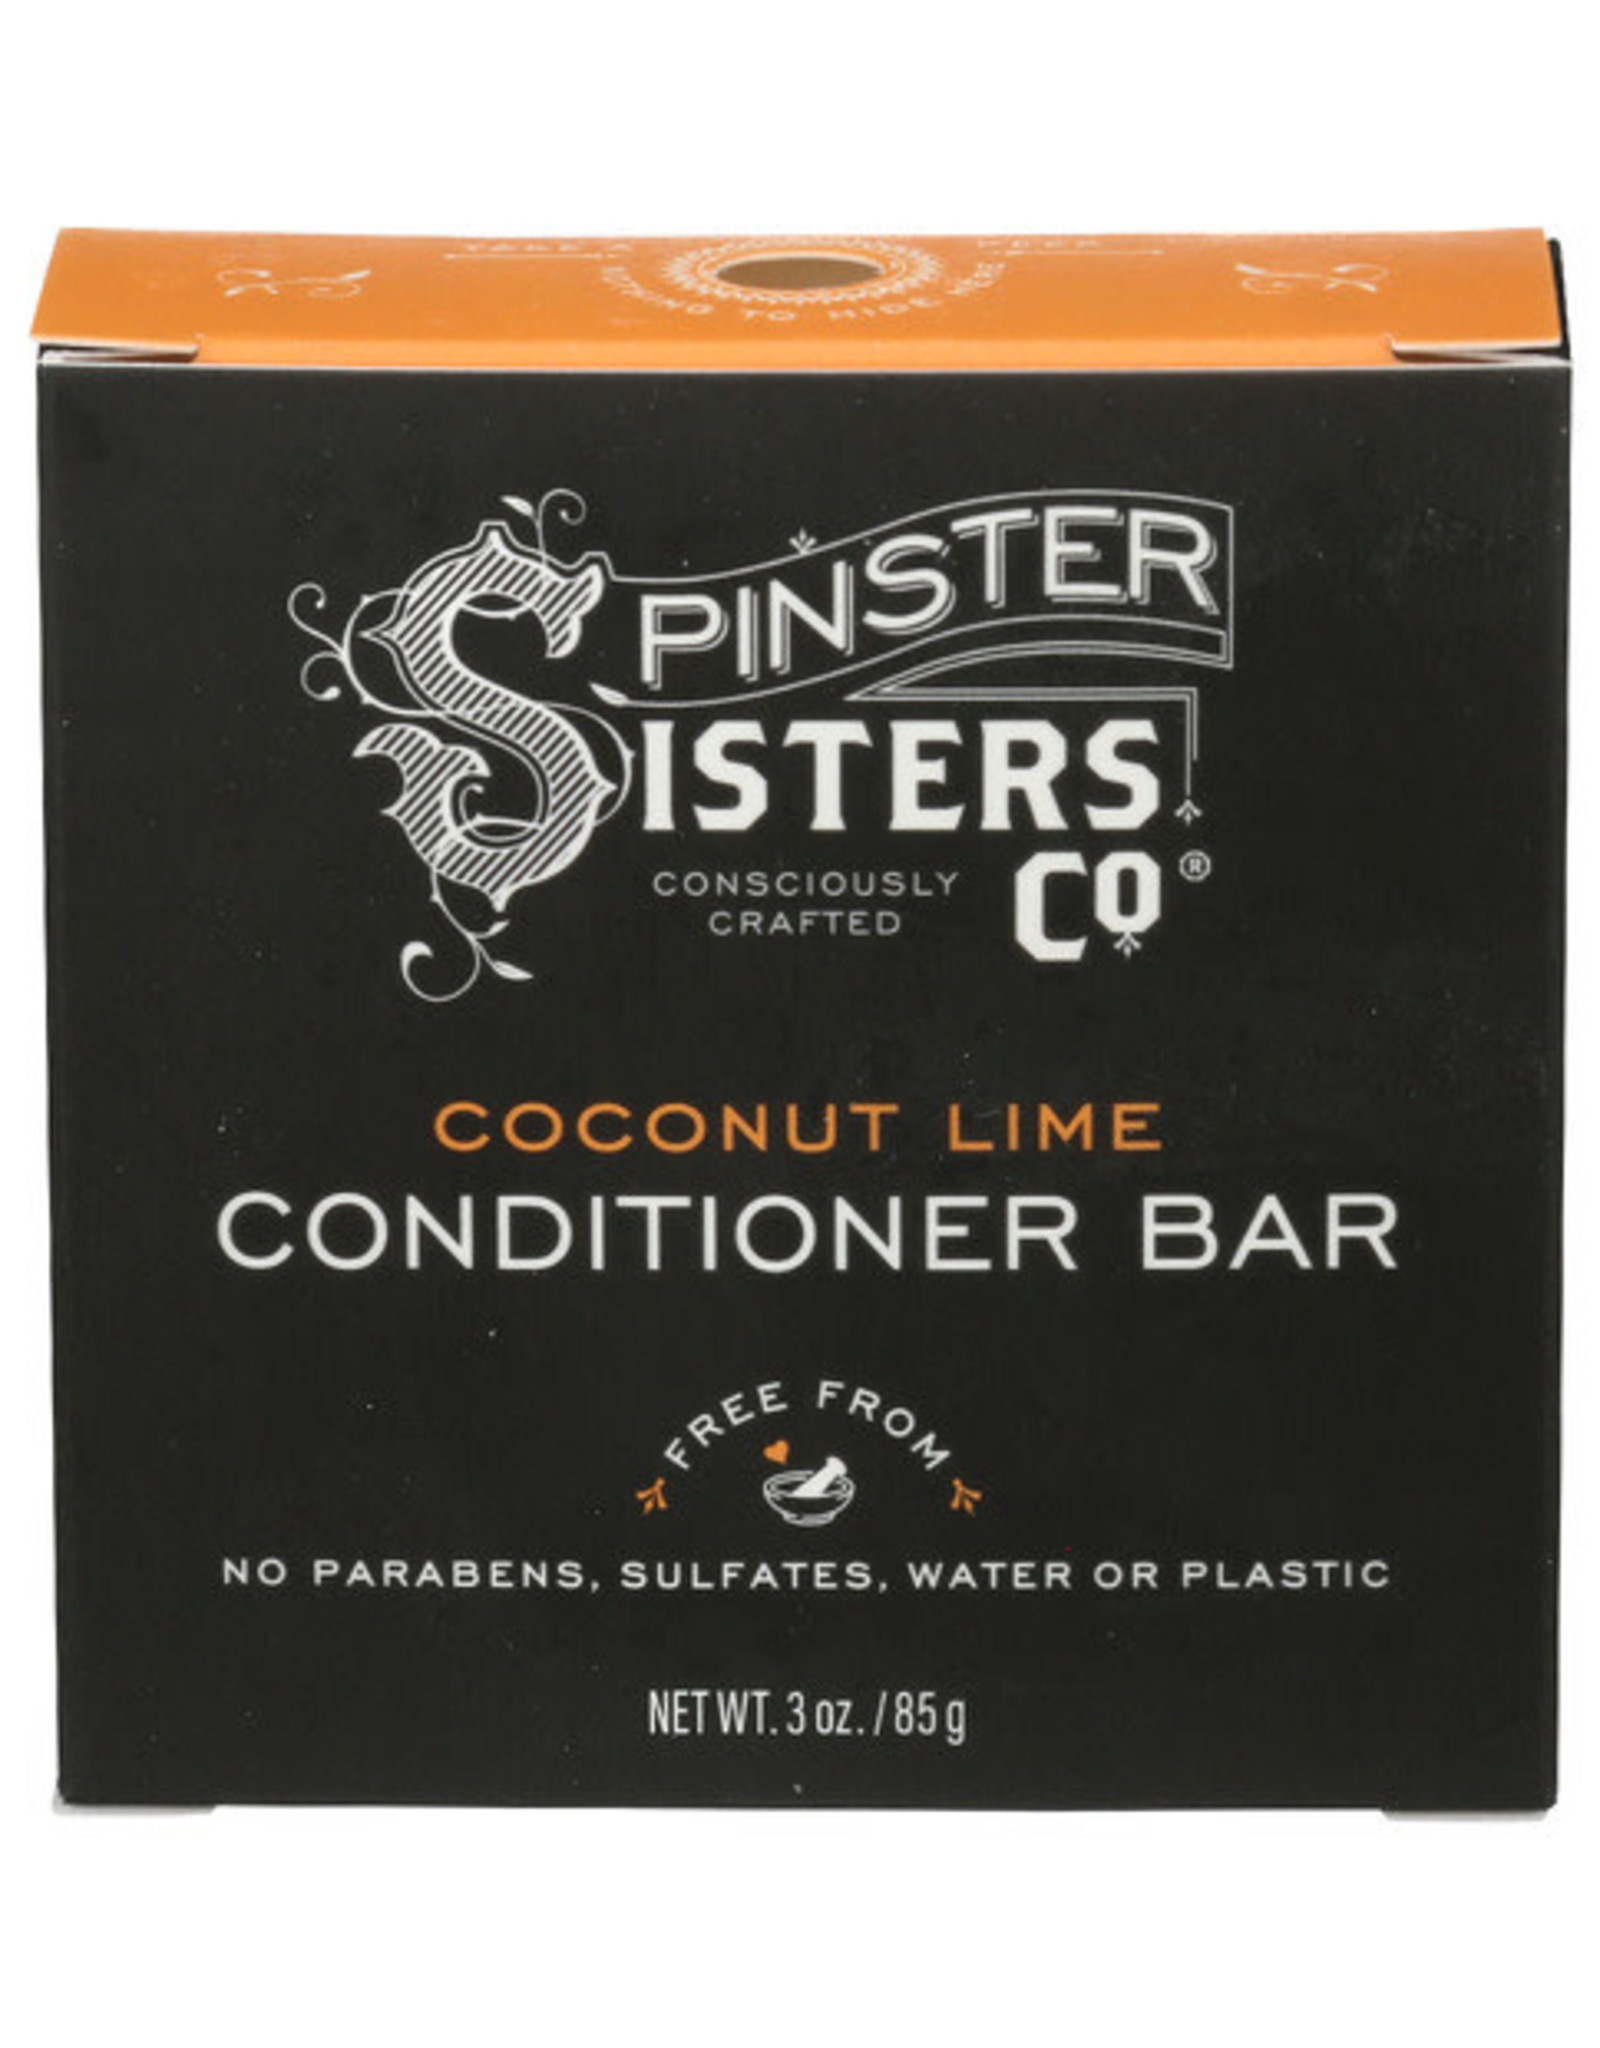 X Spinster Sisters Co Conditioner Bar